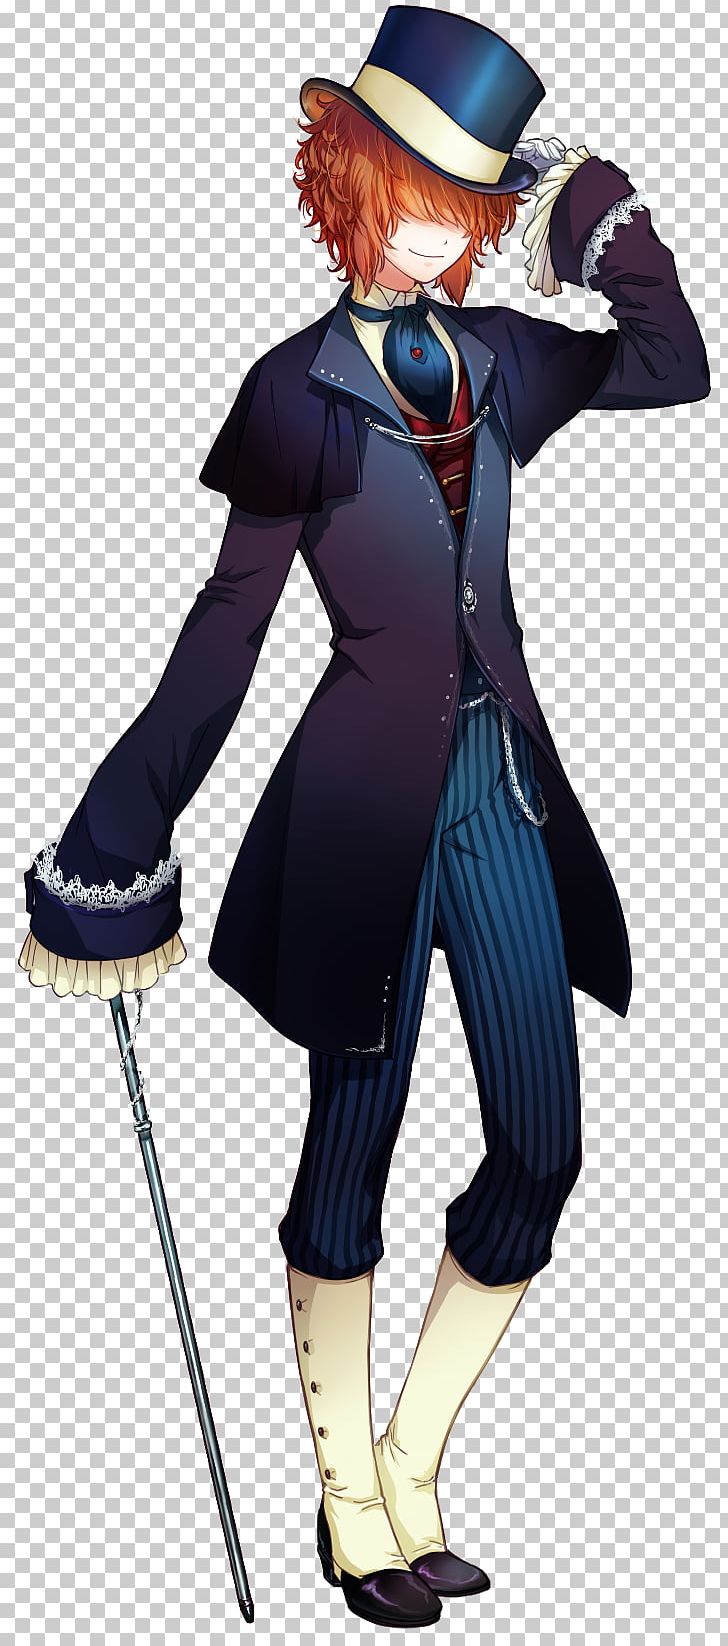 Anime Magician Boy Male PNG, Clipart, Anime, Boy, Cartoon, Child, Costume Free PNG Download